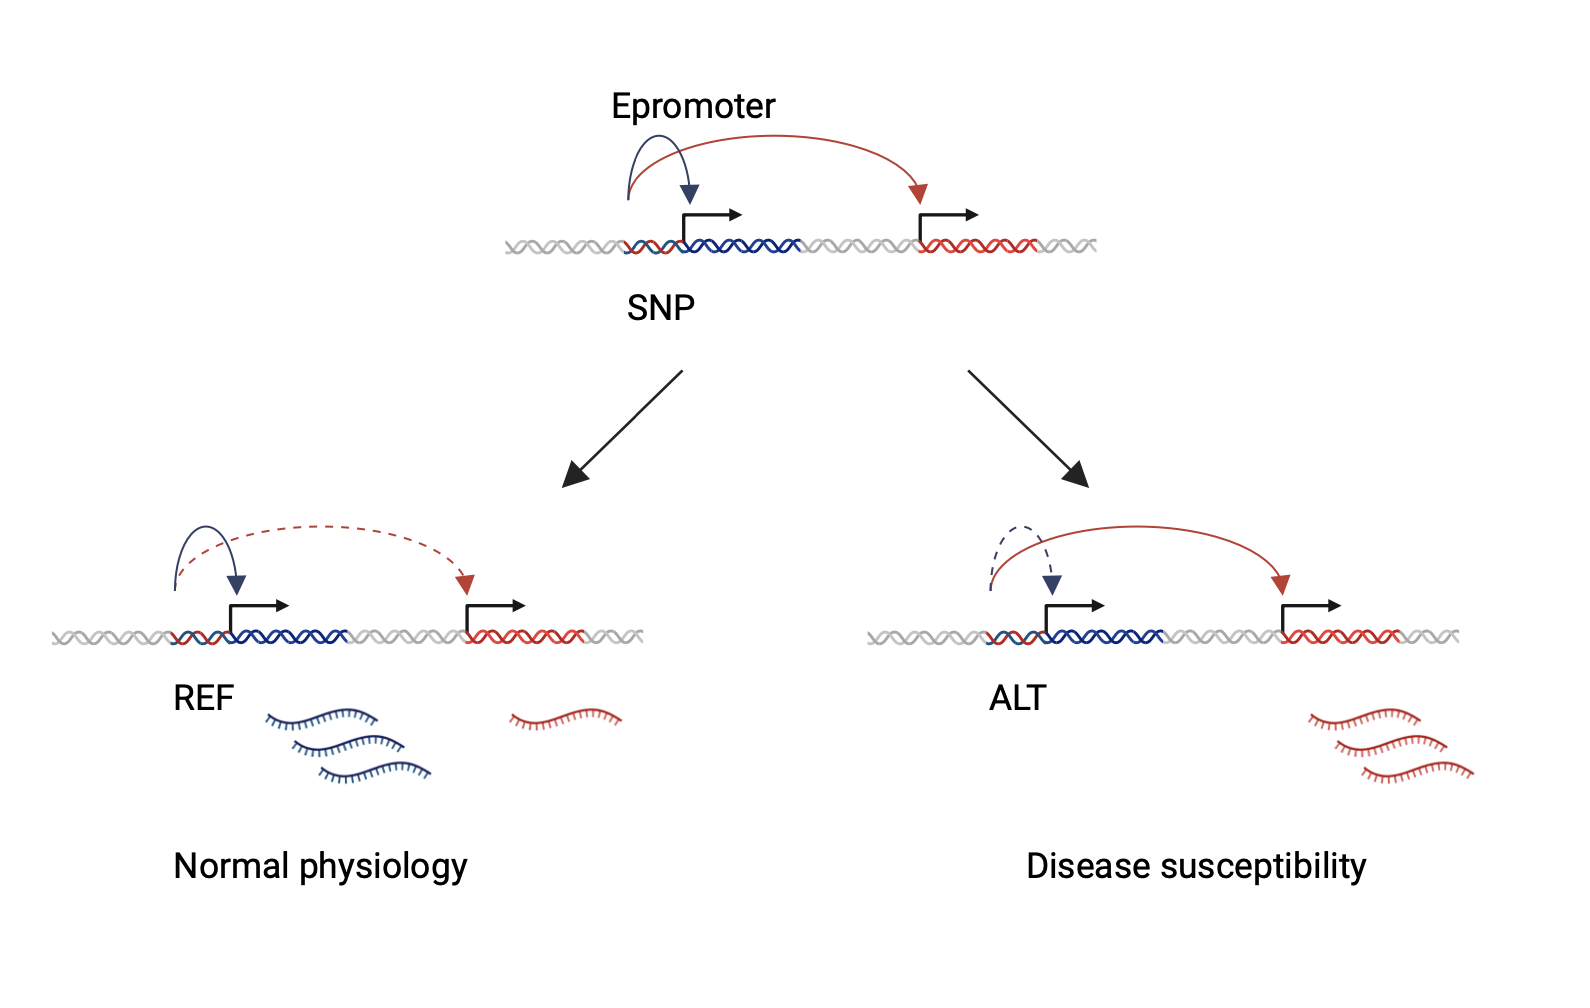 Figure 4. Confounding role of Epromoters in regulatory complexity and disease susceptibility